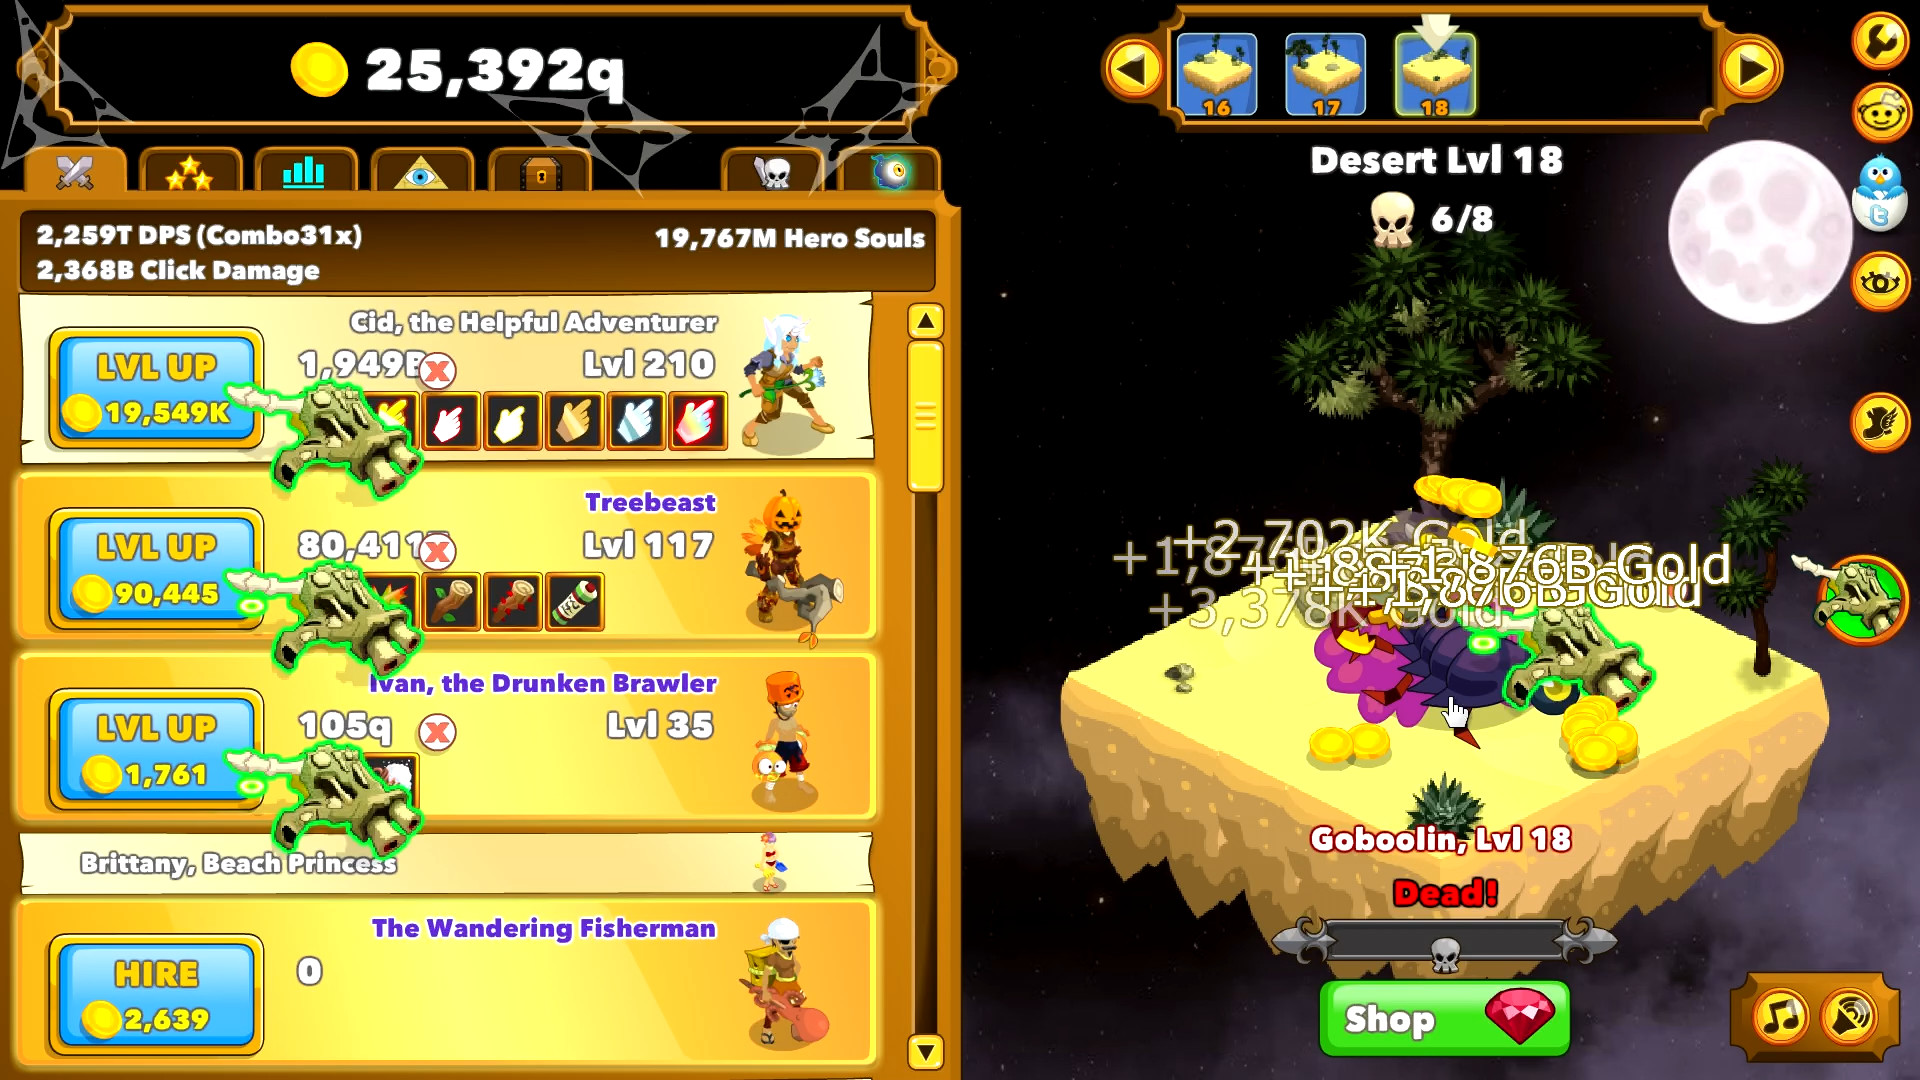 How to Play Clicker Heroes with an Autoclicker?